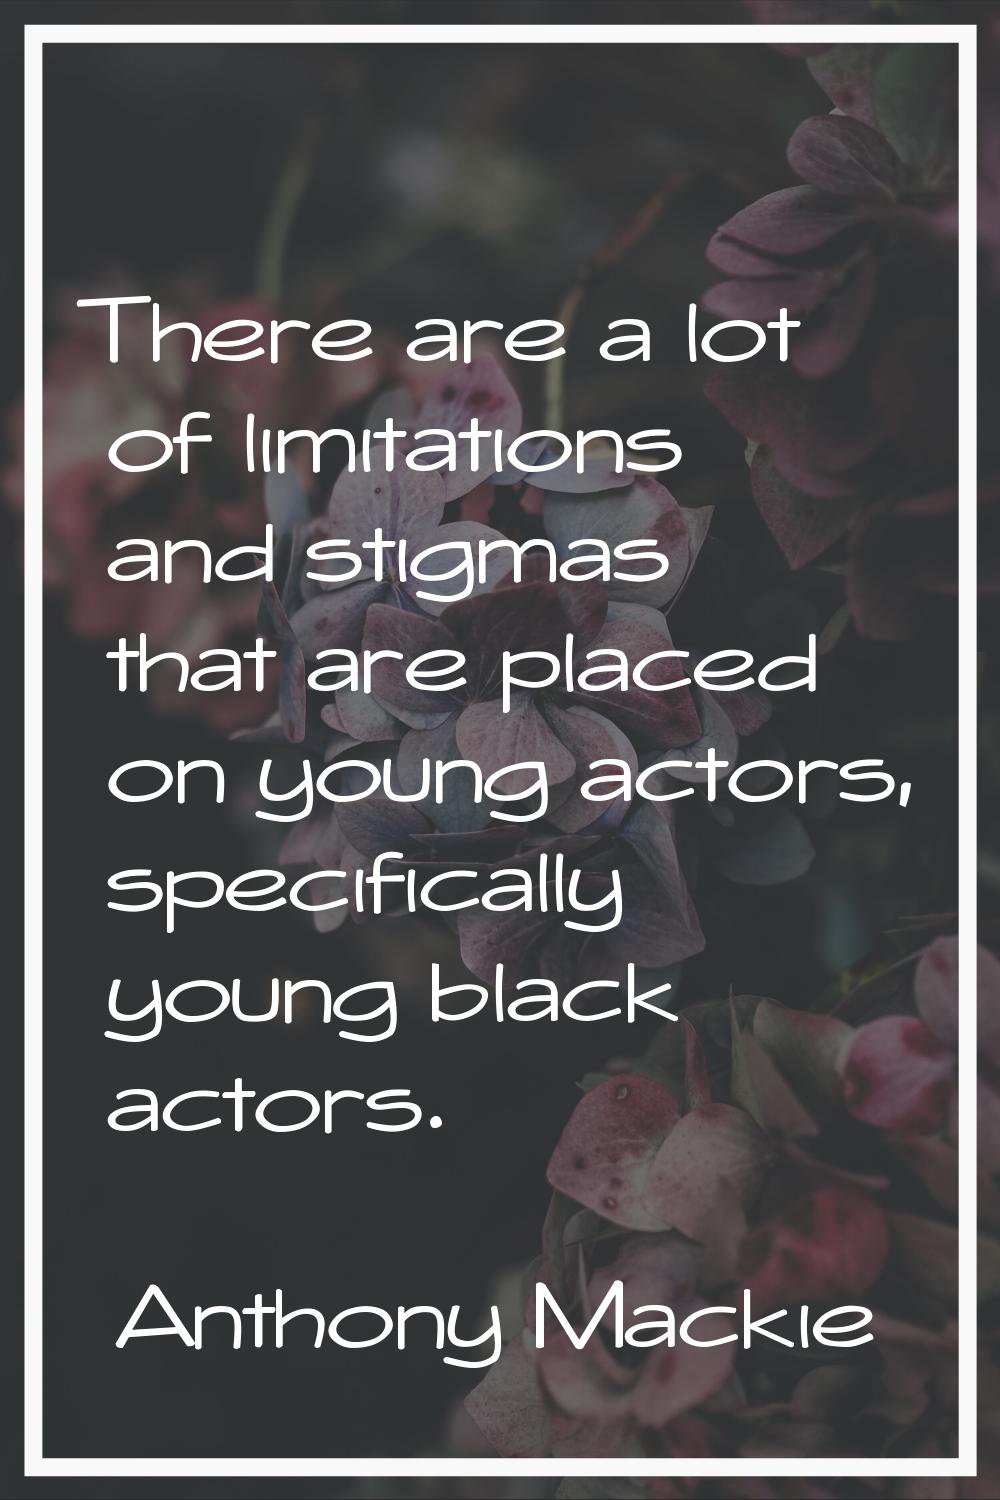 There are a lot of limitations and stigmas that are placed on young actors, specifically young blac